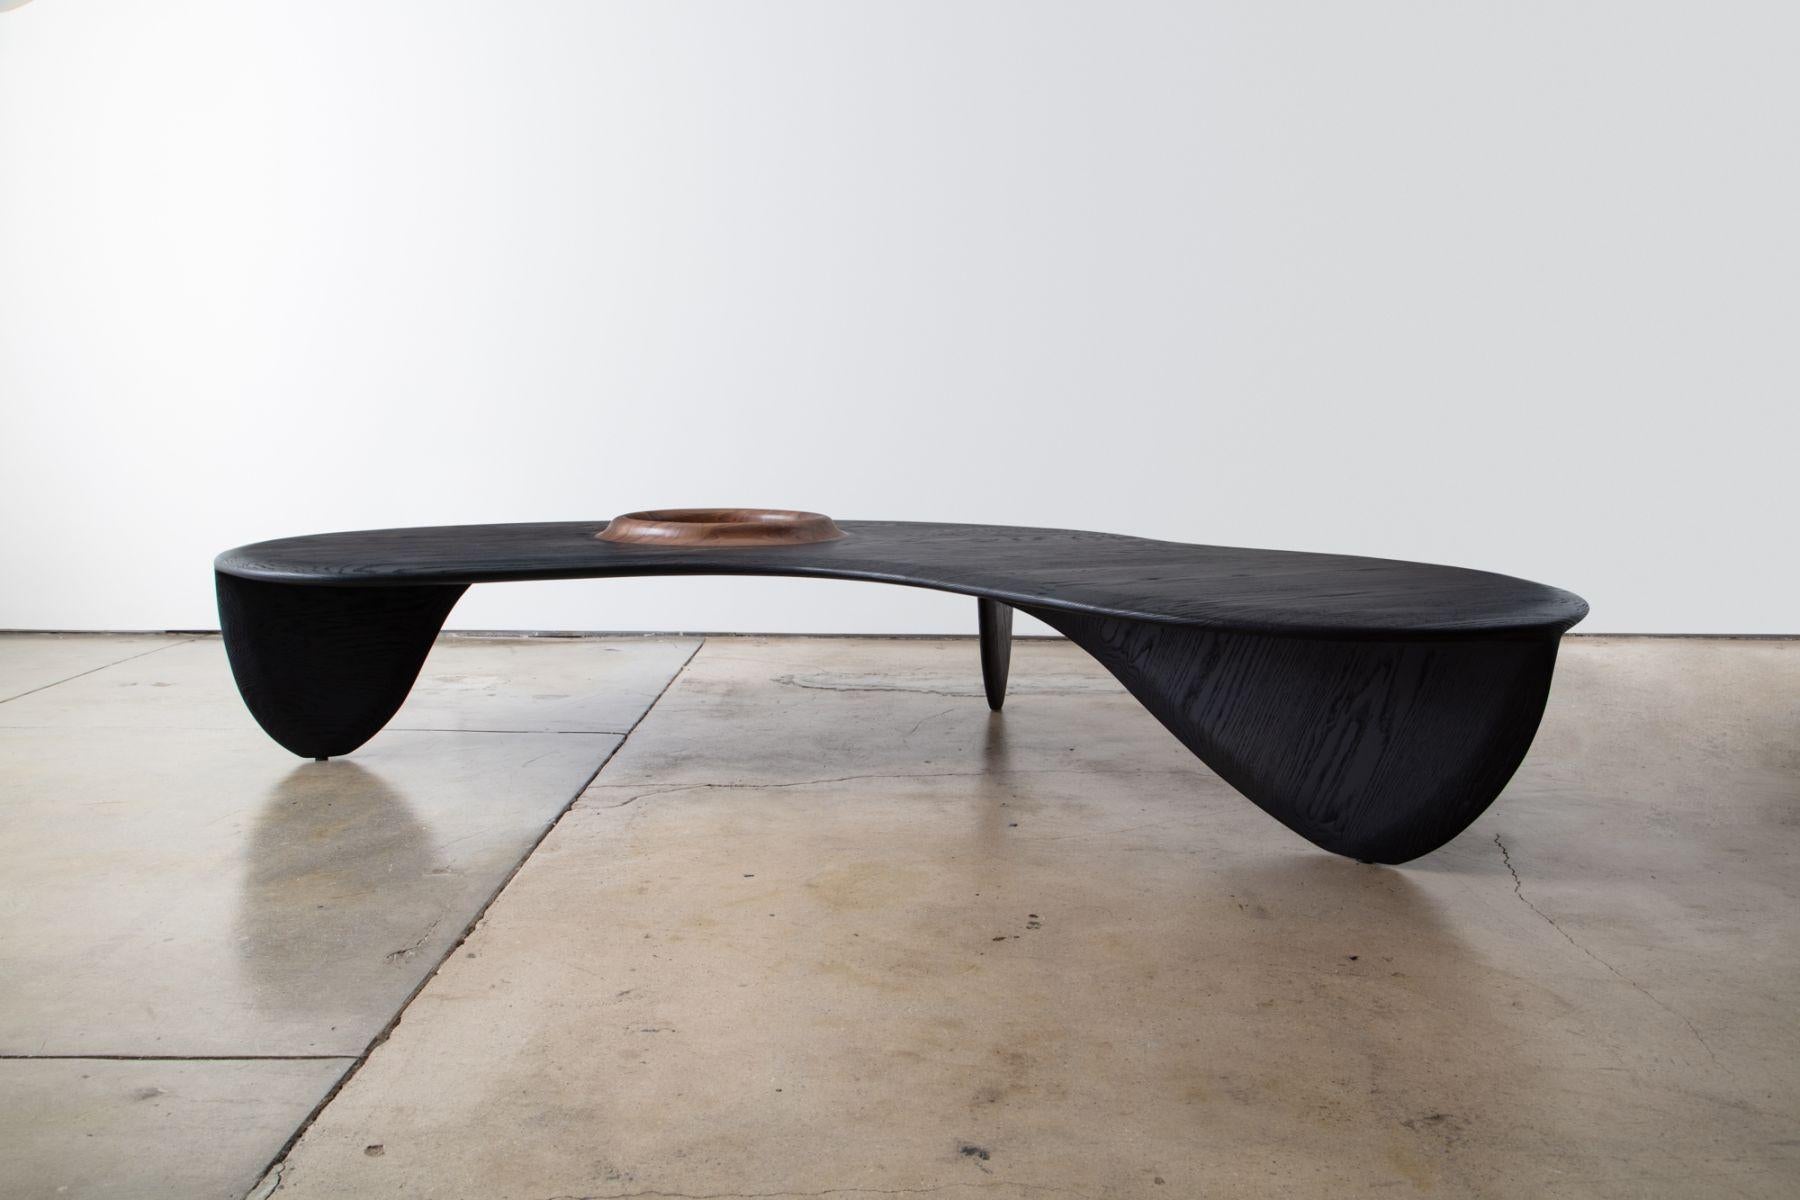 Gal Gaon (Israeli, b. 1967) is an architect and designer based in Tel Aviv, Israel. His custom work includes tables, desks, benches, consoles, and stools that marry the fields of art, design, and architecture. Designed and fabricated in Israel, each